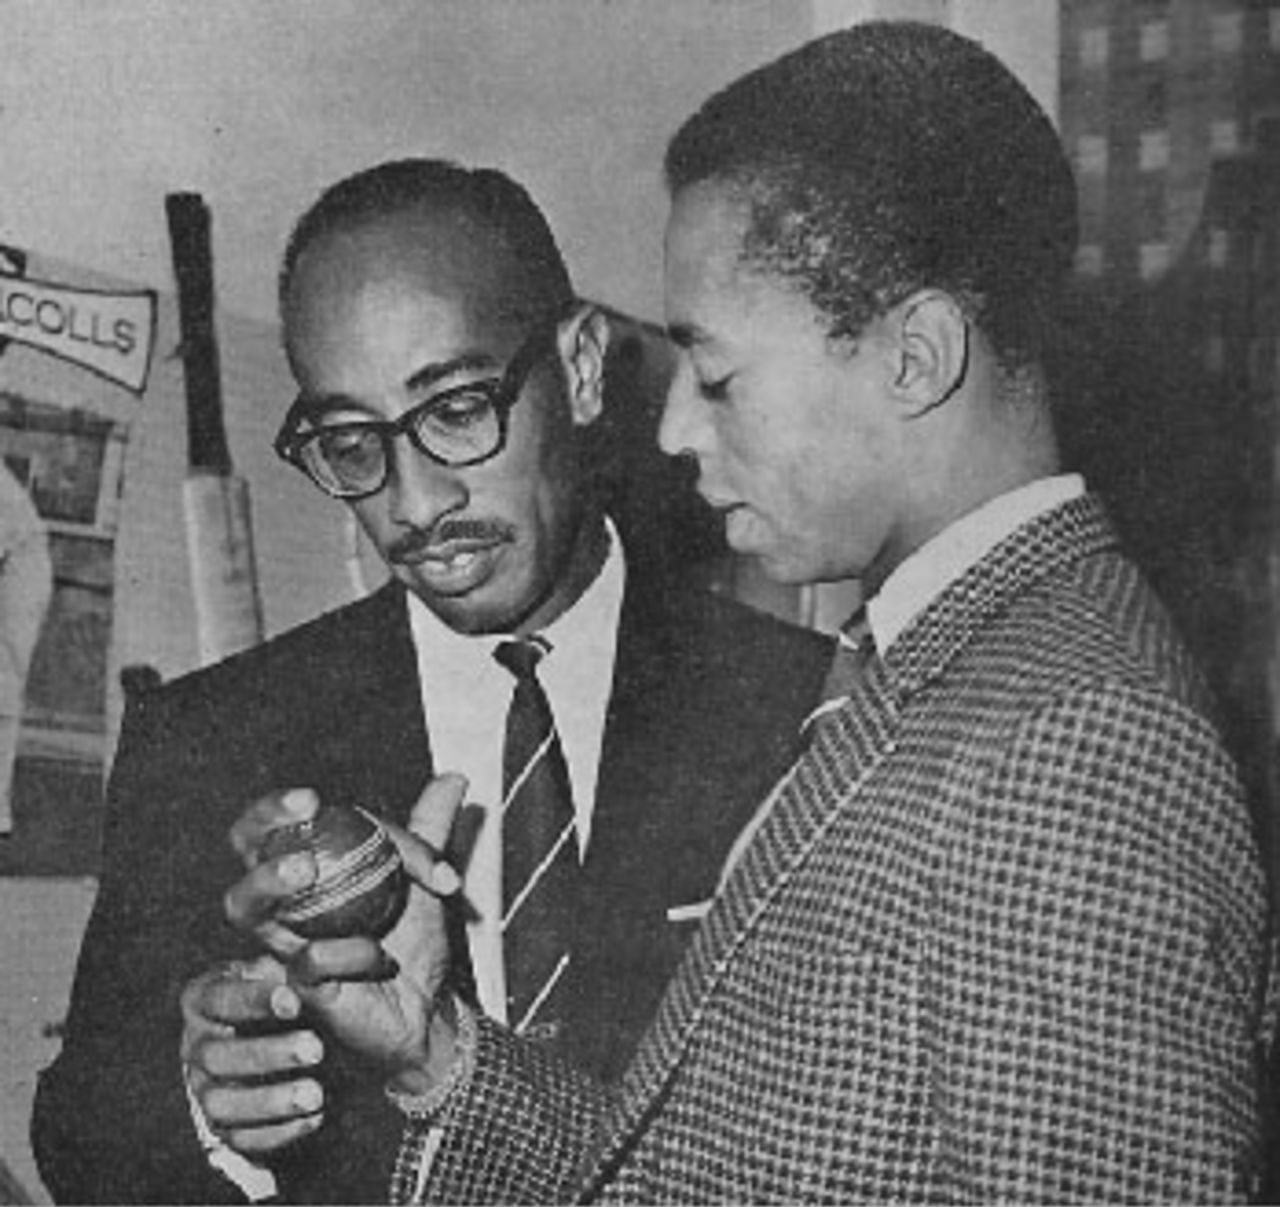 Alf Valentine (left) and Lance Gibbs discuss the art of spin, England, 1963